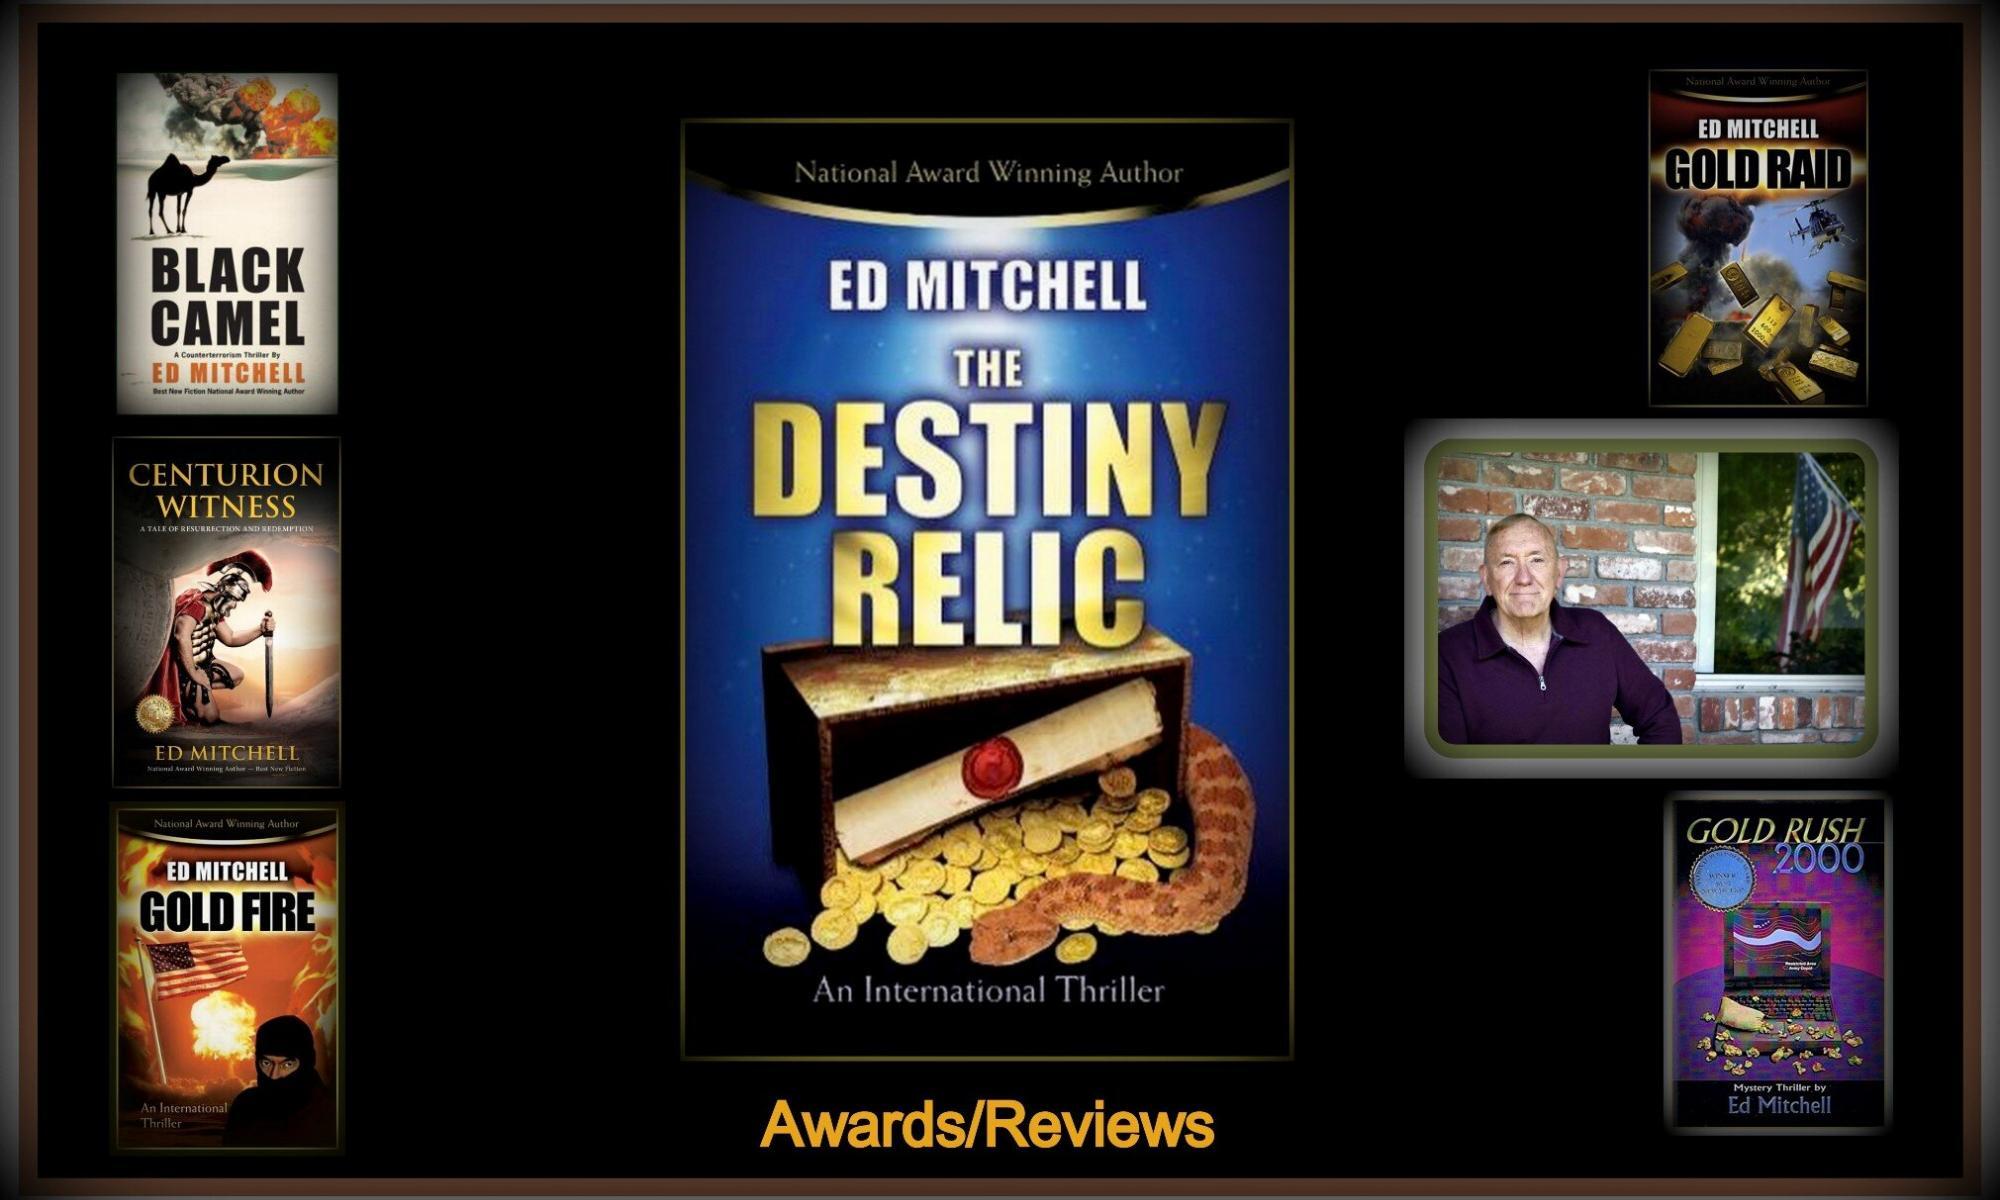 The book The Destiny Relic and surrounding prior and after books by author Ed Mitchell